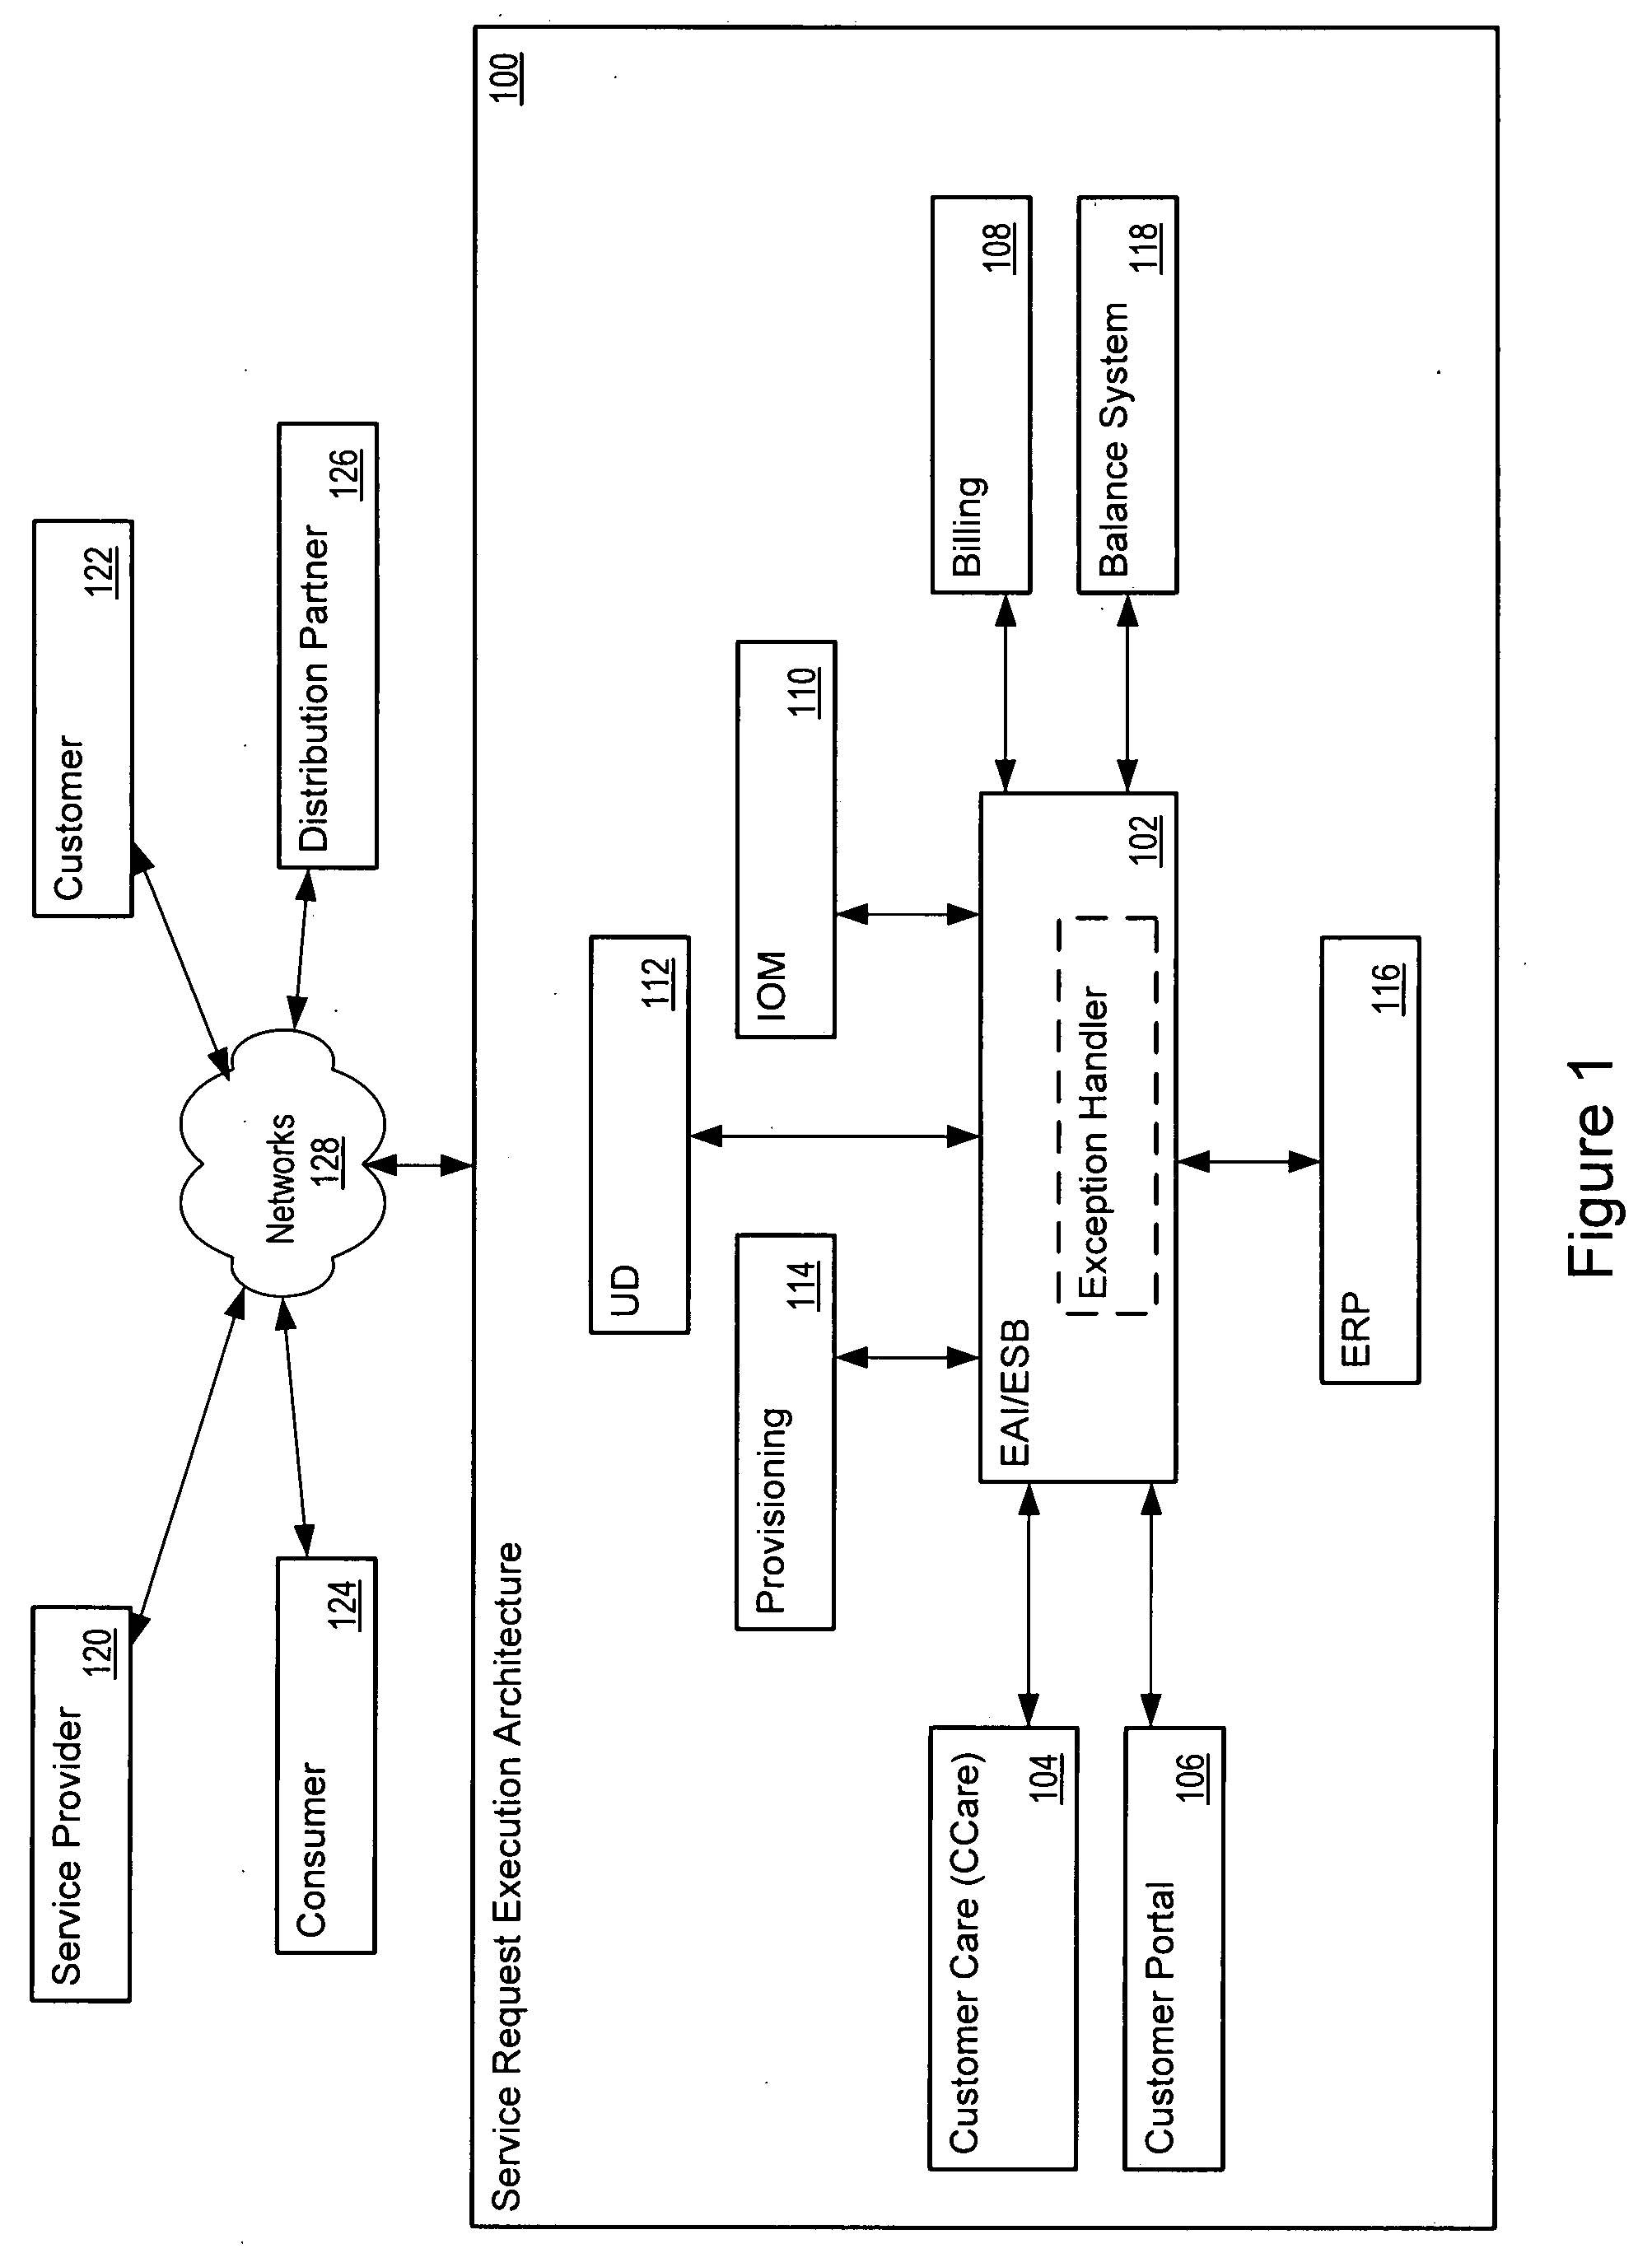 Service request execution architecture for a communications service provider